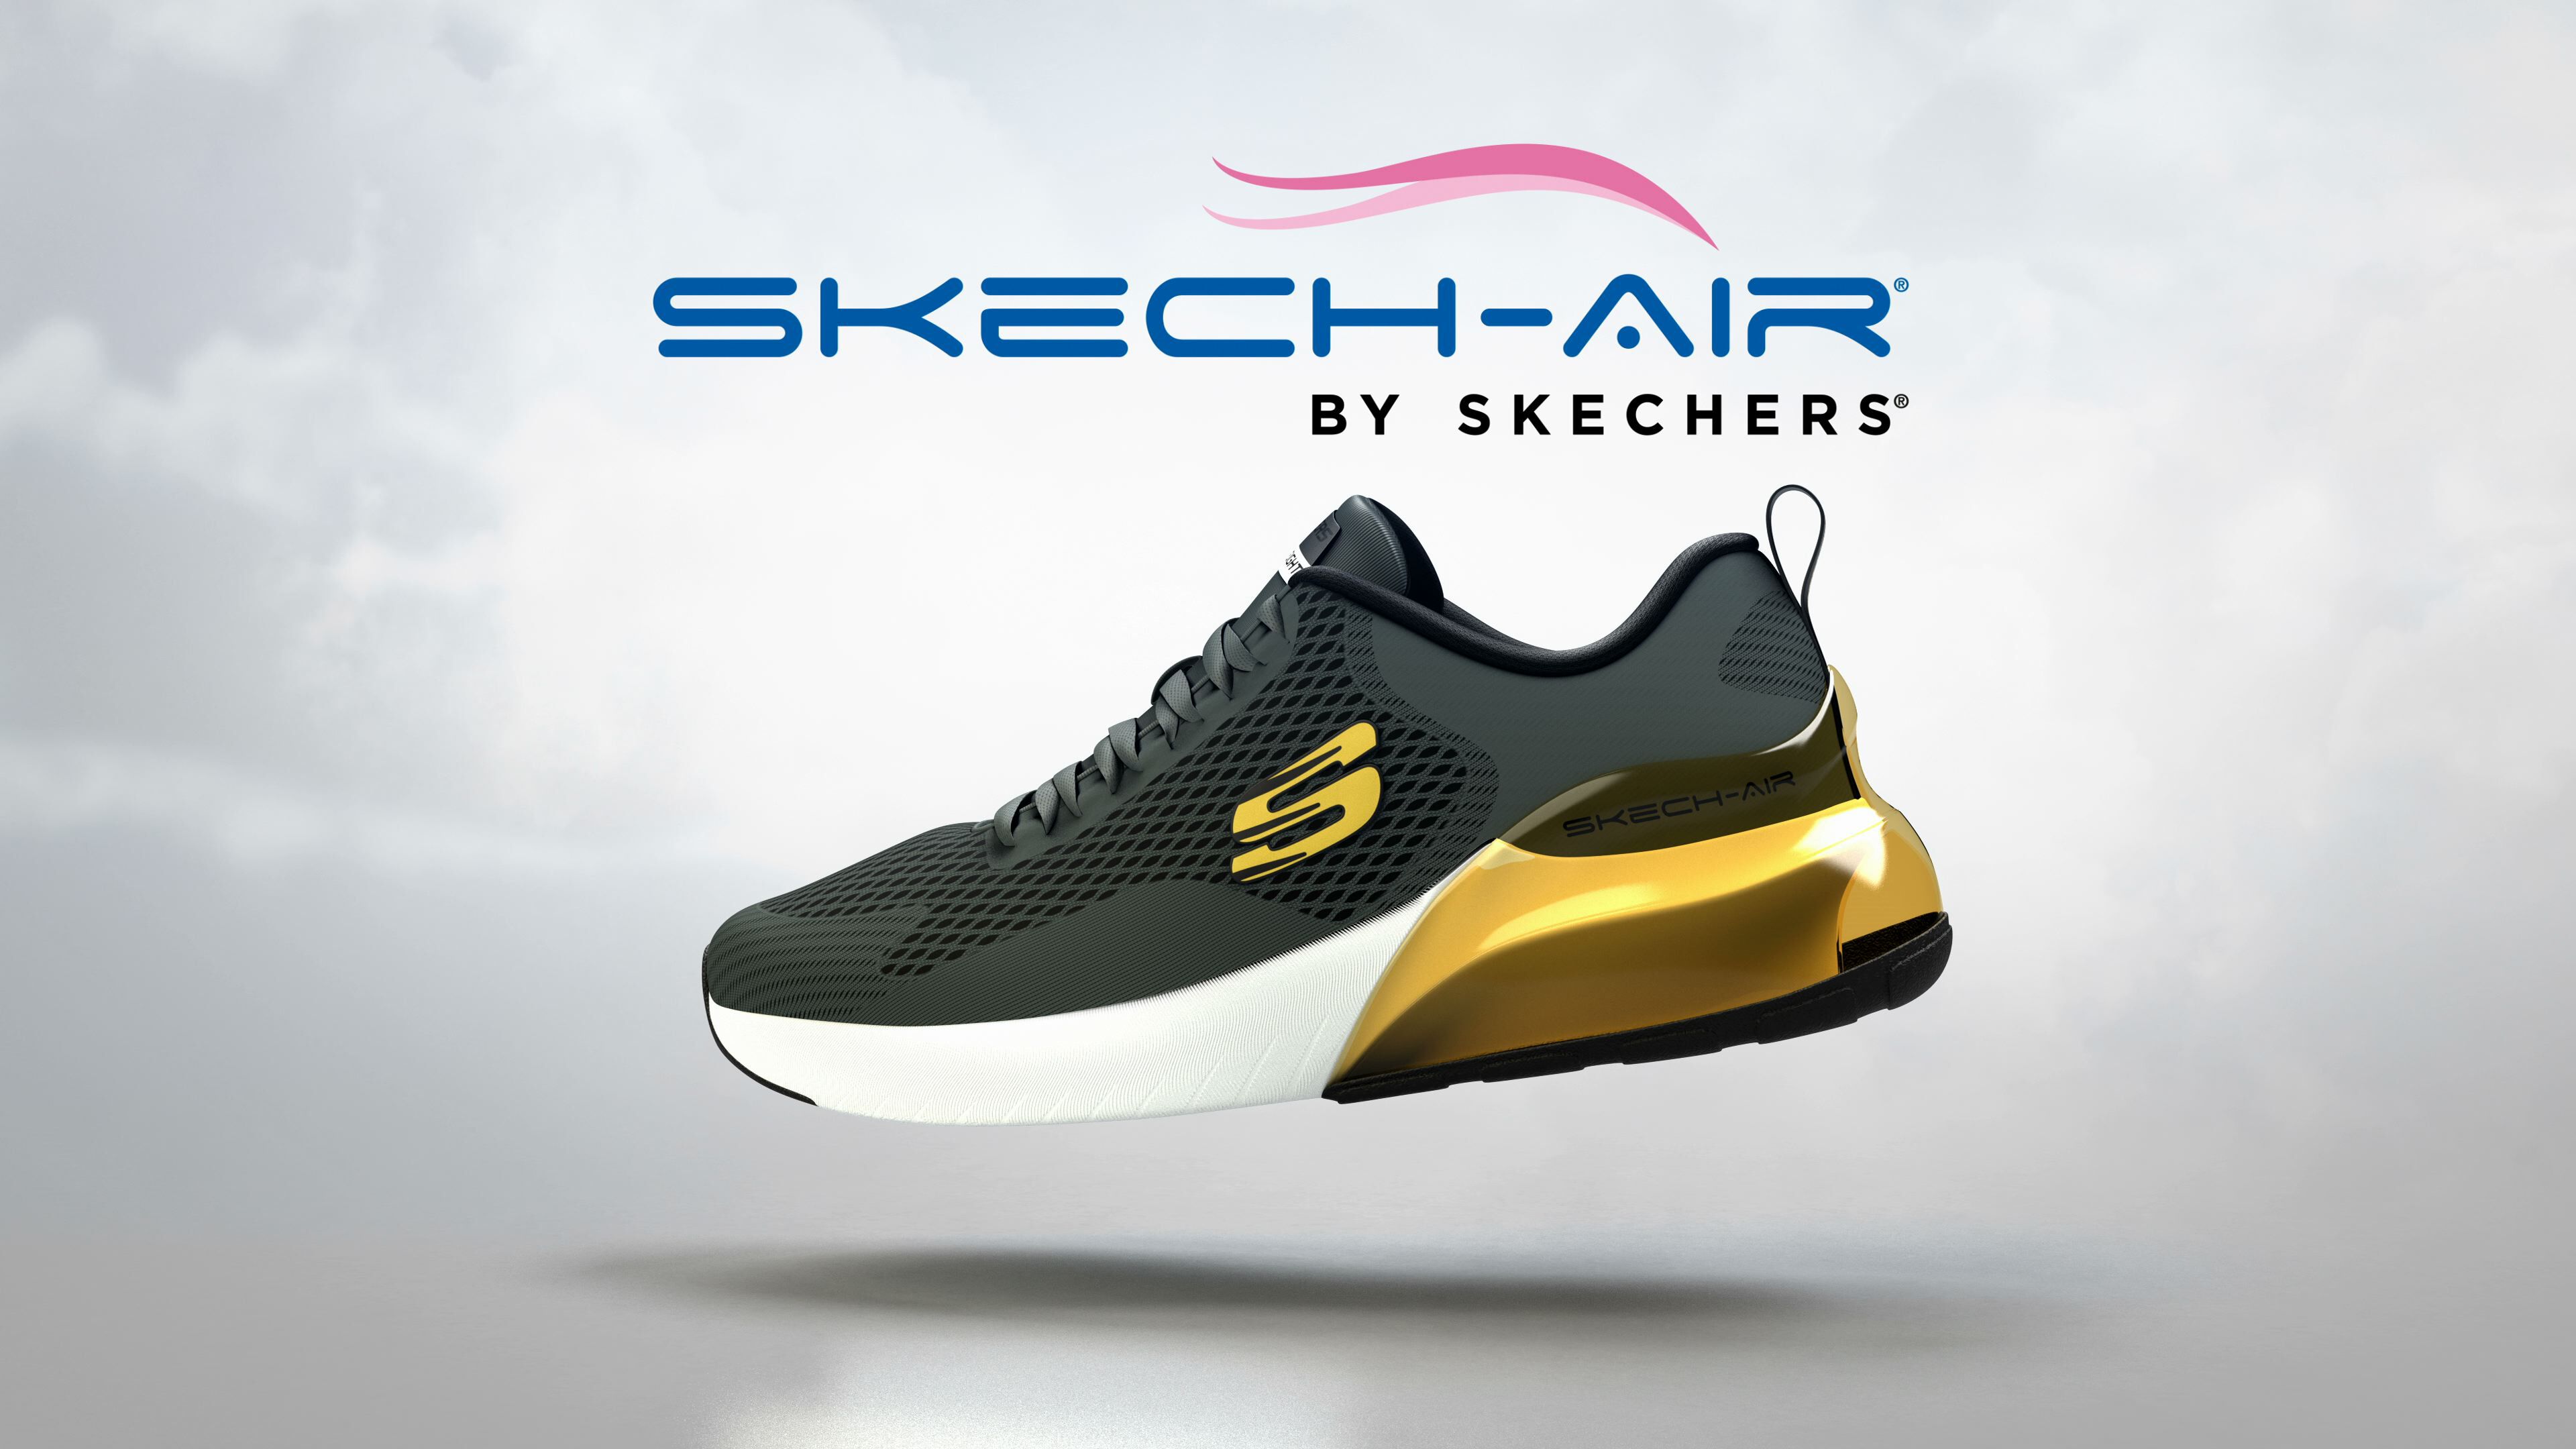 skechers game shoes commercial